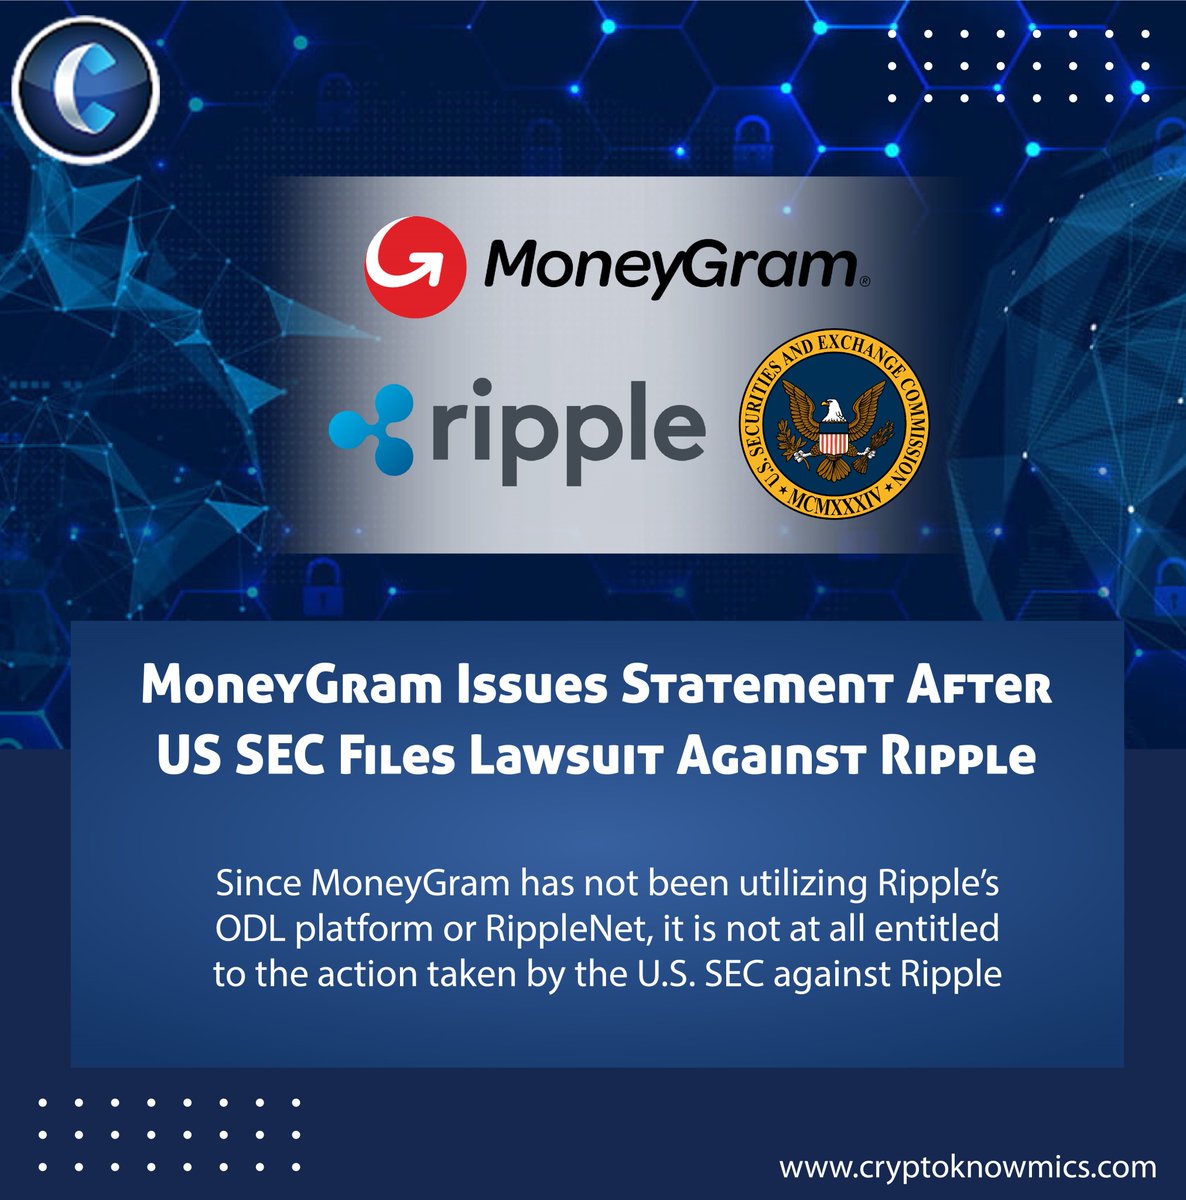 Followed by the lawsuit filed against Ripple by the US SEC, MoneyGram, with respect to its partnership with Ripple has given detailed forward-looking statements, mentioning all the risks and uncertainties.

Read the full news here:bit.ly/3hdvIan 

#MoneyGram #P2Ppayments